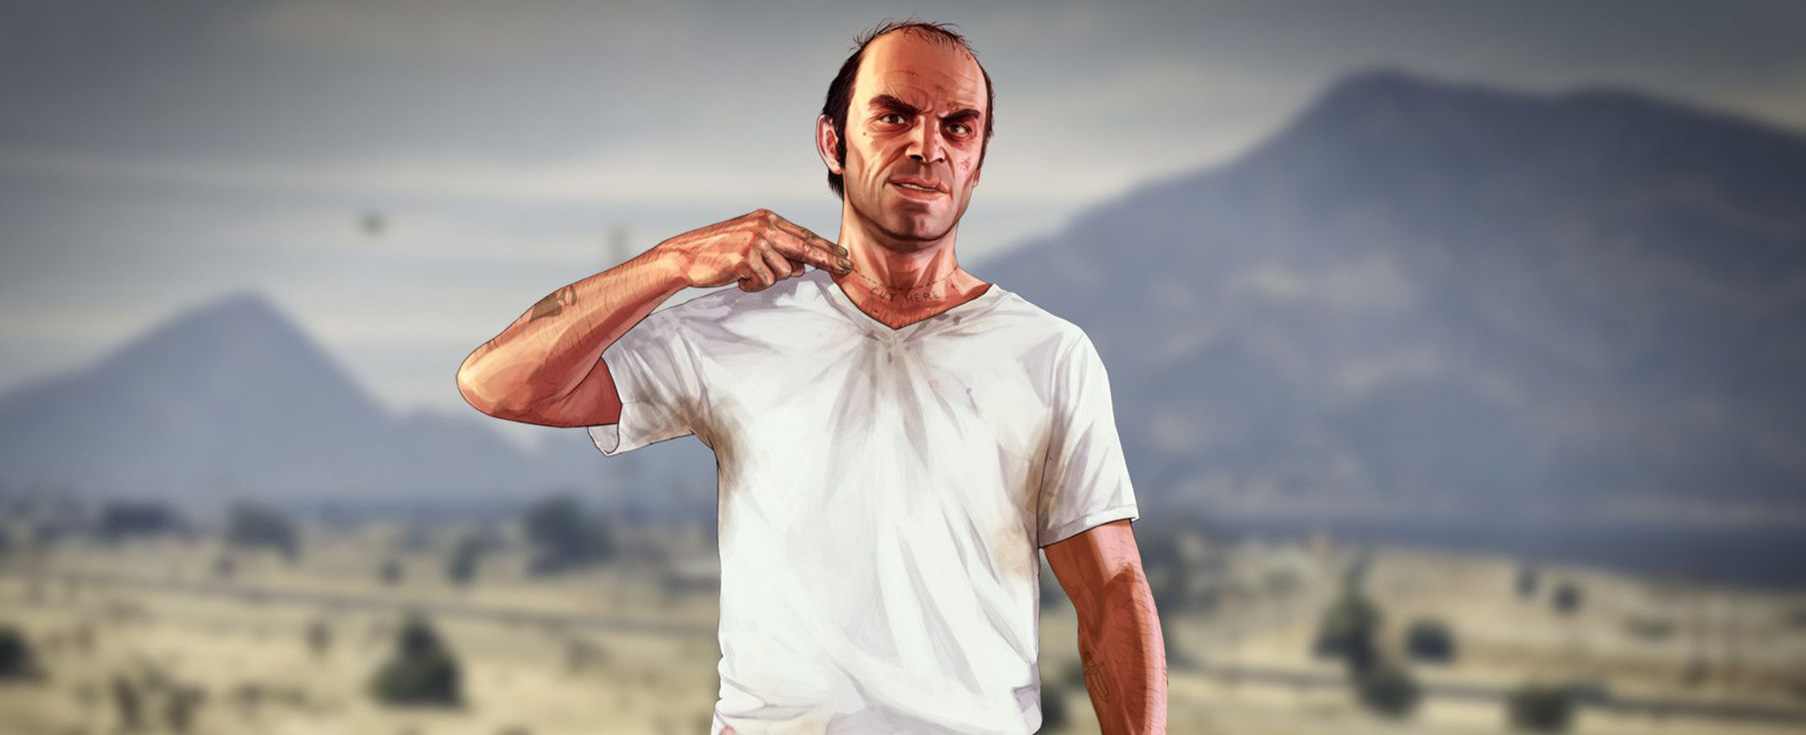 The real trevor from gta 5 фото 26